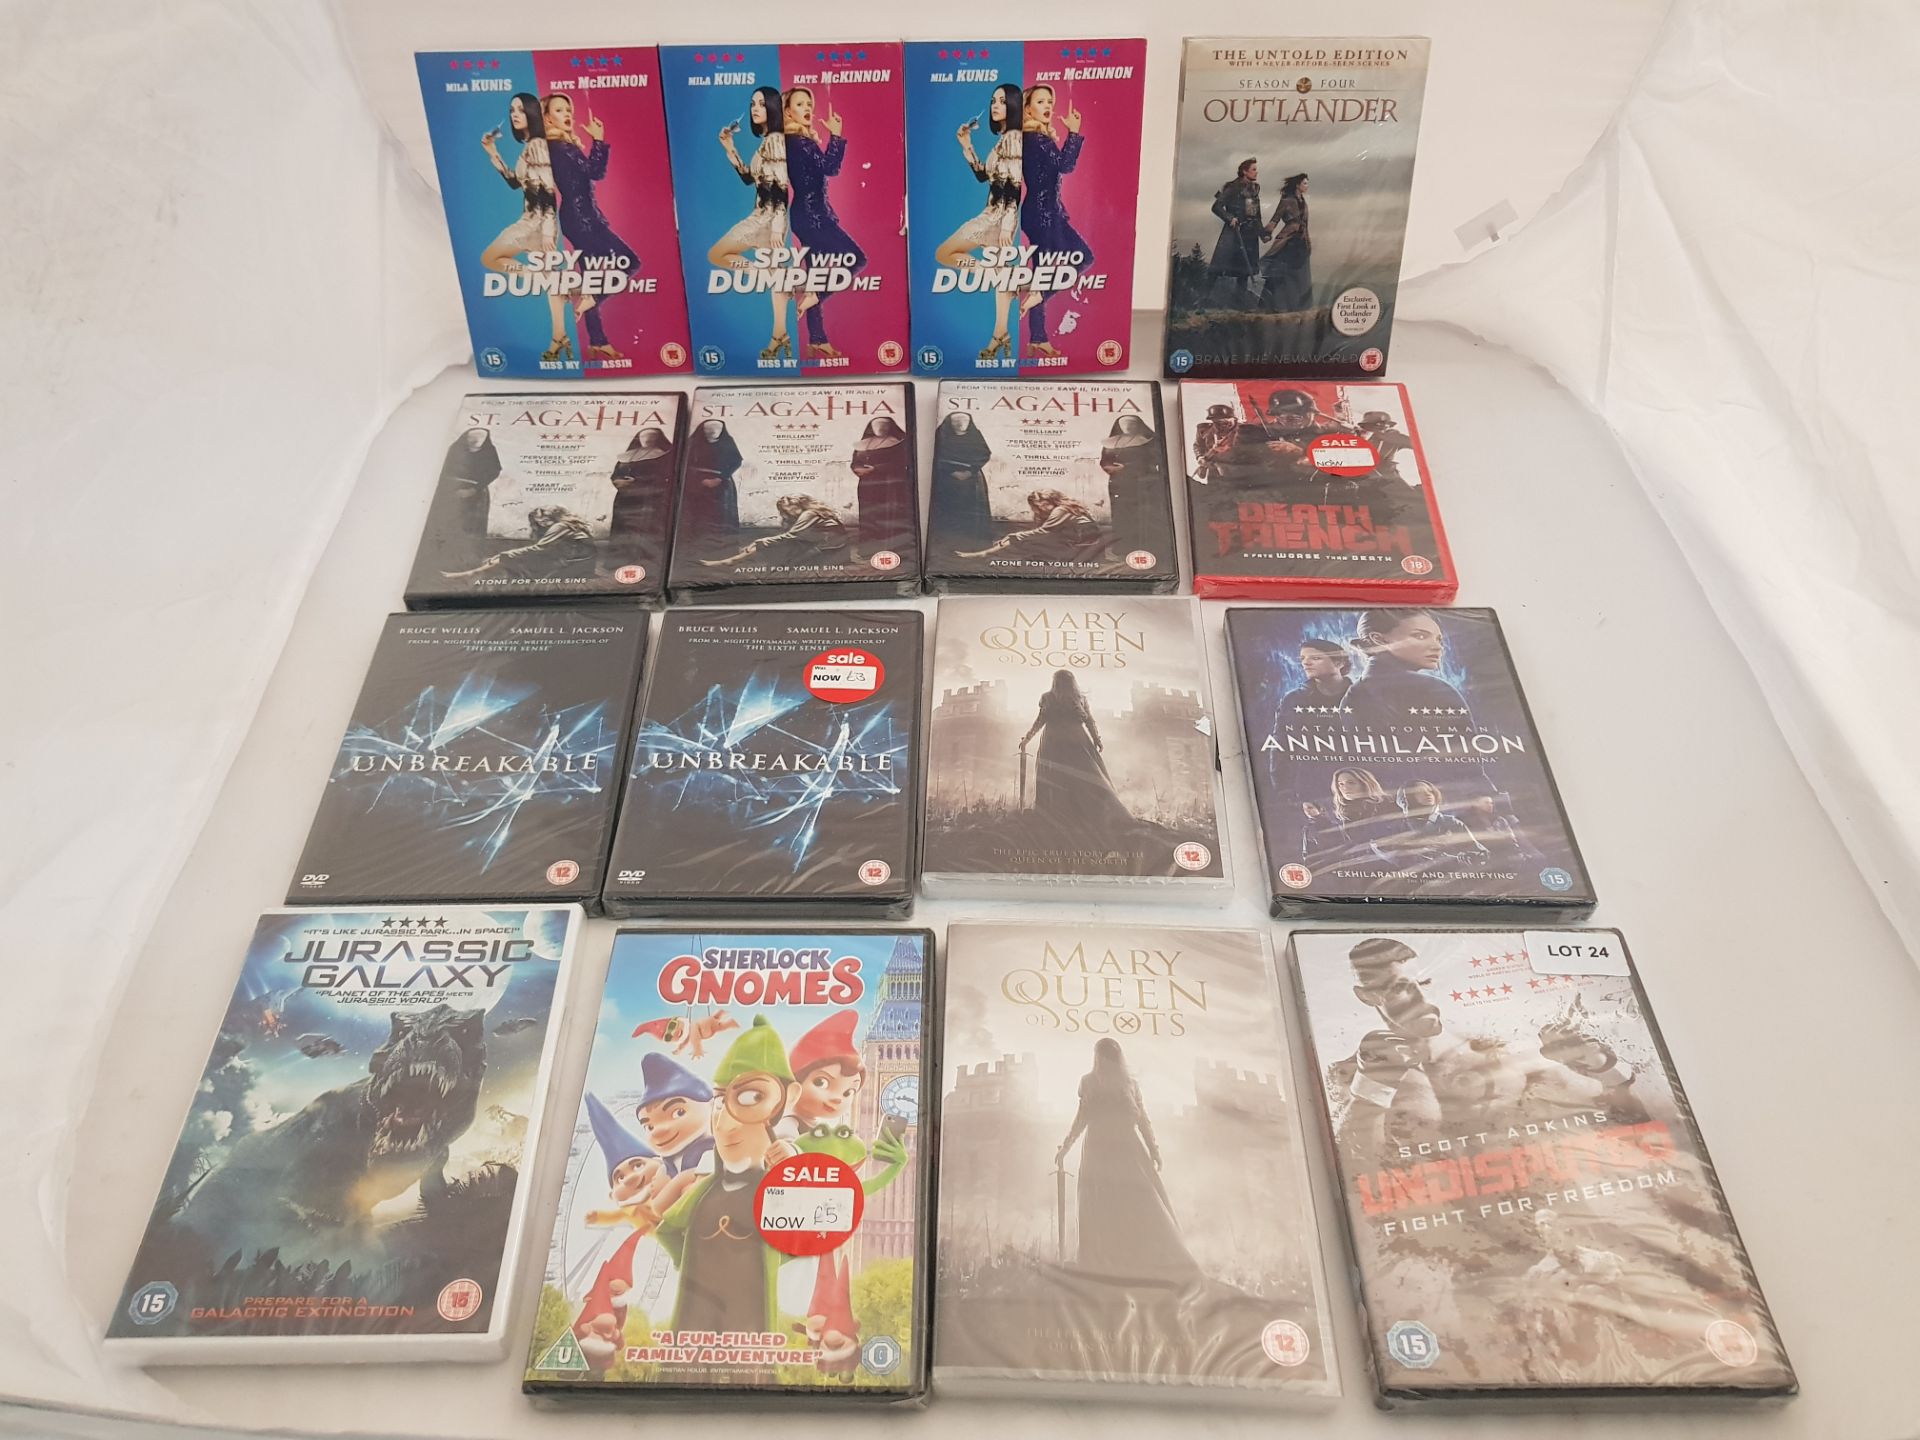 16 x Assorted DVDs to include Sherlock Gnomes, Jurassic Galaxy, Unbreakable, St. Agatha, The Sp...